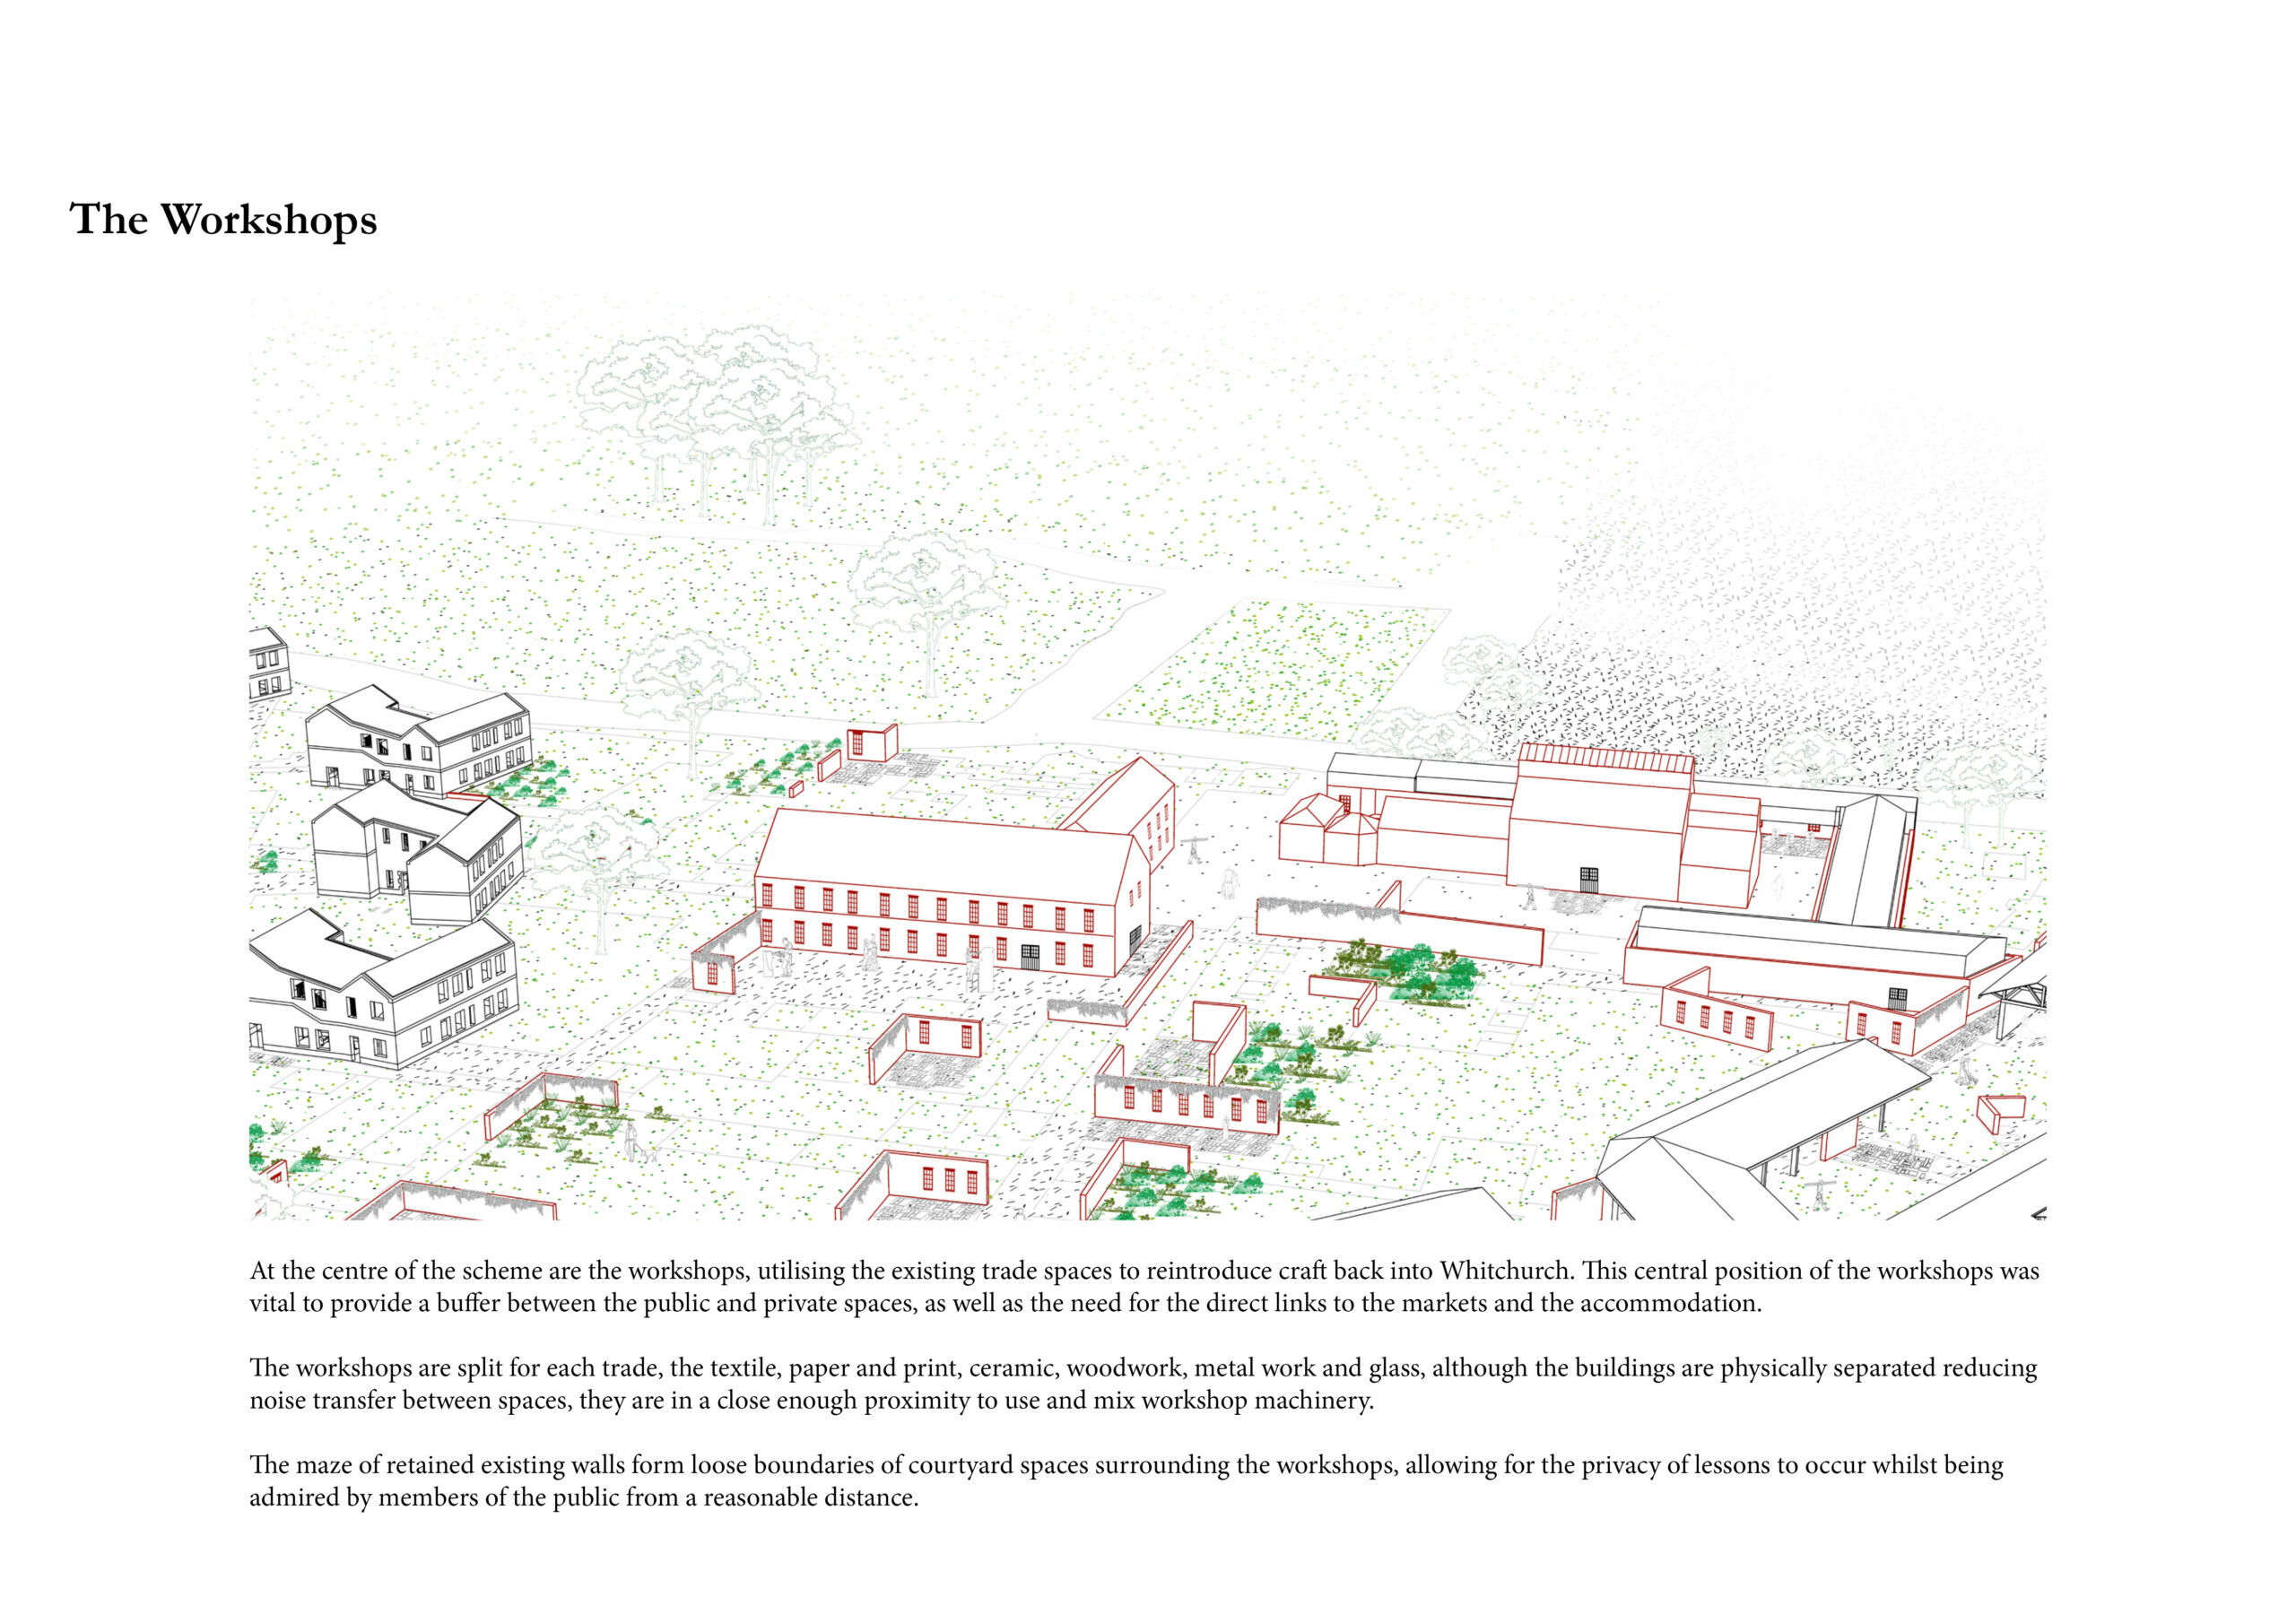 Portfolio Page of a perspective of the workshops that provides a buffer between the public and private spaces in the proposal, as well as the direct links to the markets and the accommodation.